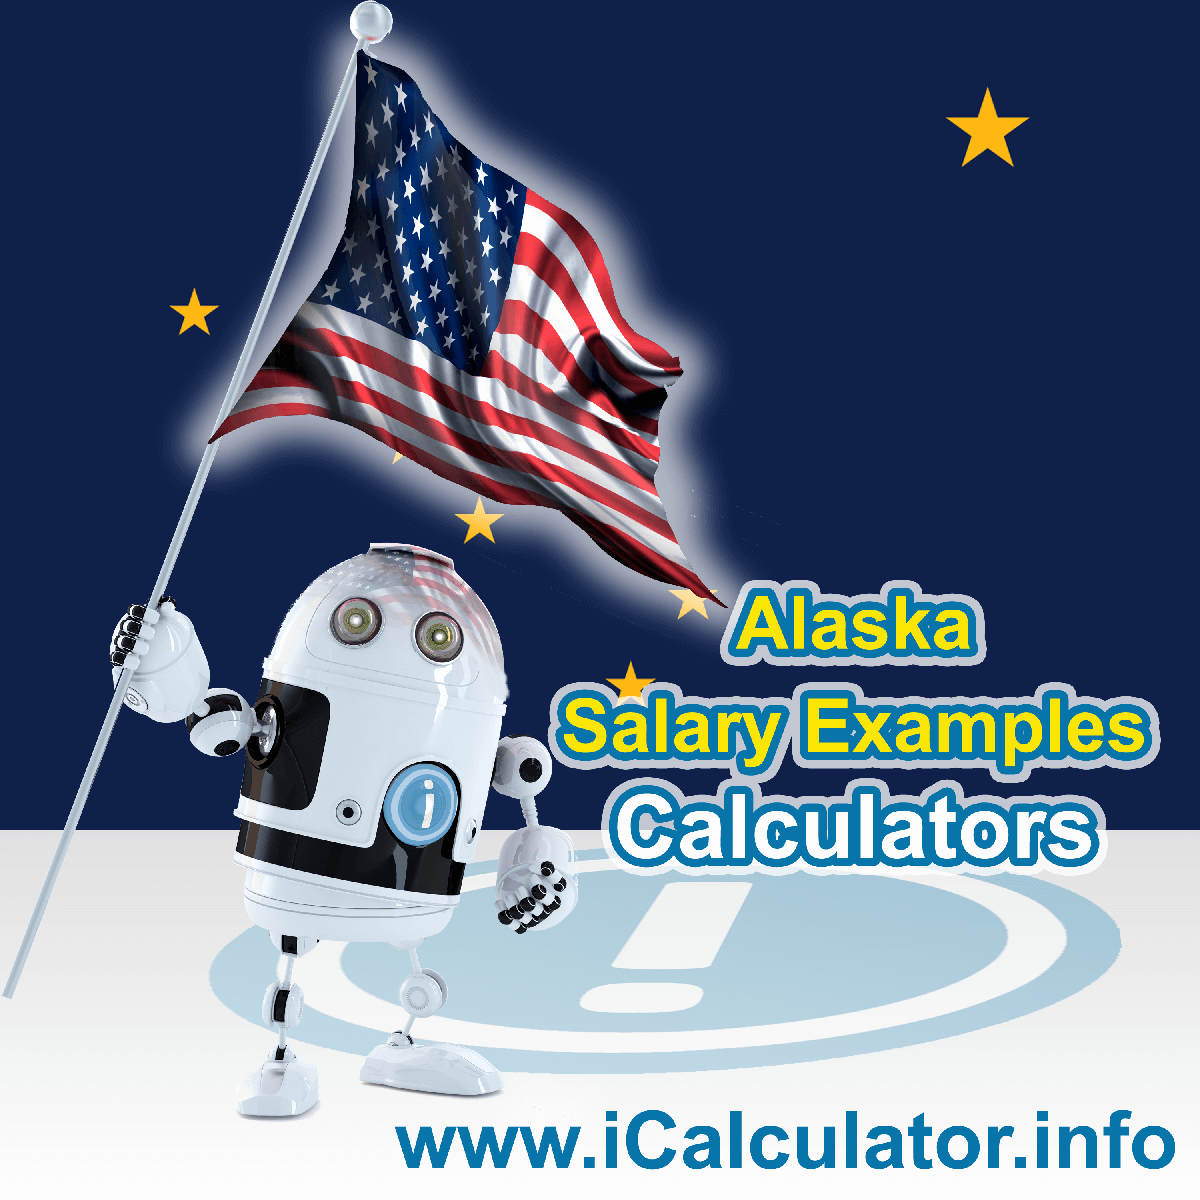 Alaska Salary Example for $ 95,000.00 in 2023 | iCalculator™ | $ 95,000.00 salary example for employee and employer paying Alaska State tincome taxes. Detailed salary after tax calculation including Alaska State Tax, Federal State Tax, Medicare Deductions, Social Security, Capital Gains and other income tax and salary deductions complete with supporting Alaska state tax tables 